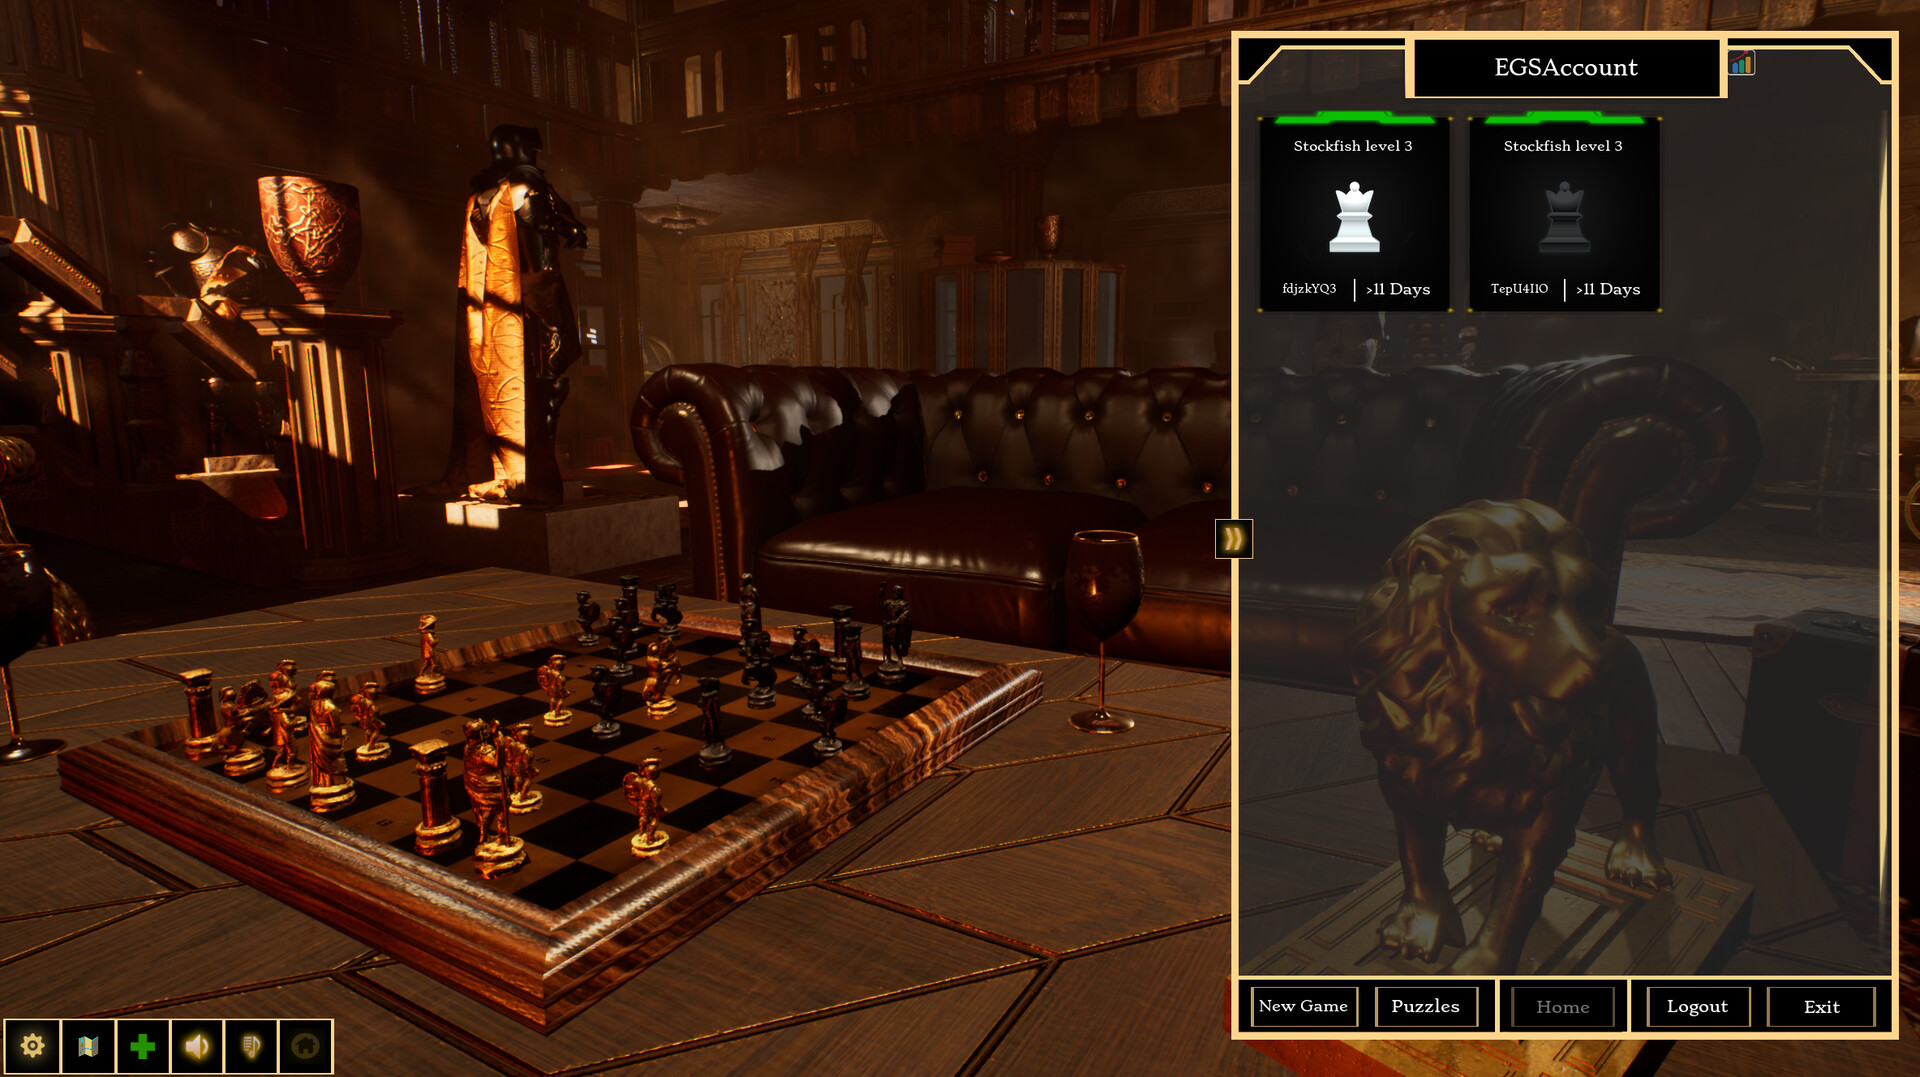 FPS Chess on steam #steam #pc #game #videogame #chess #pieces #fyp